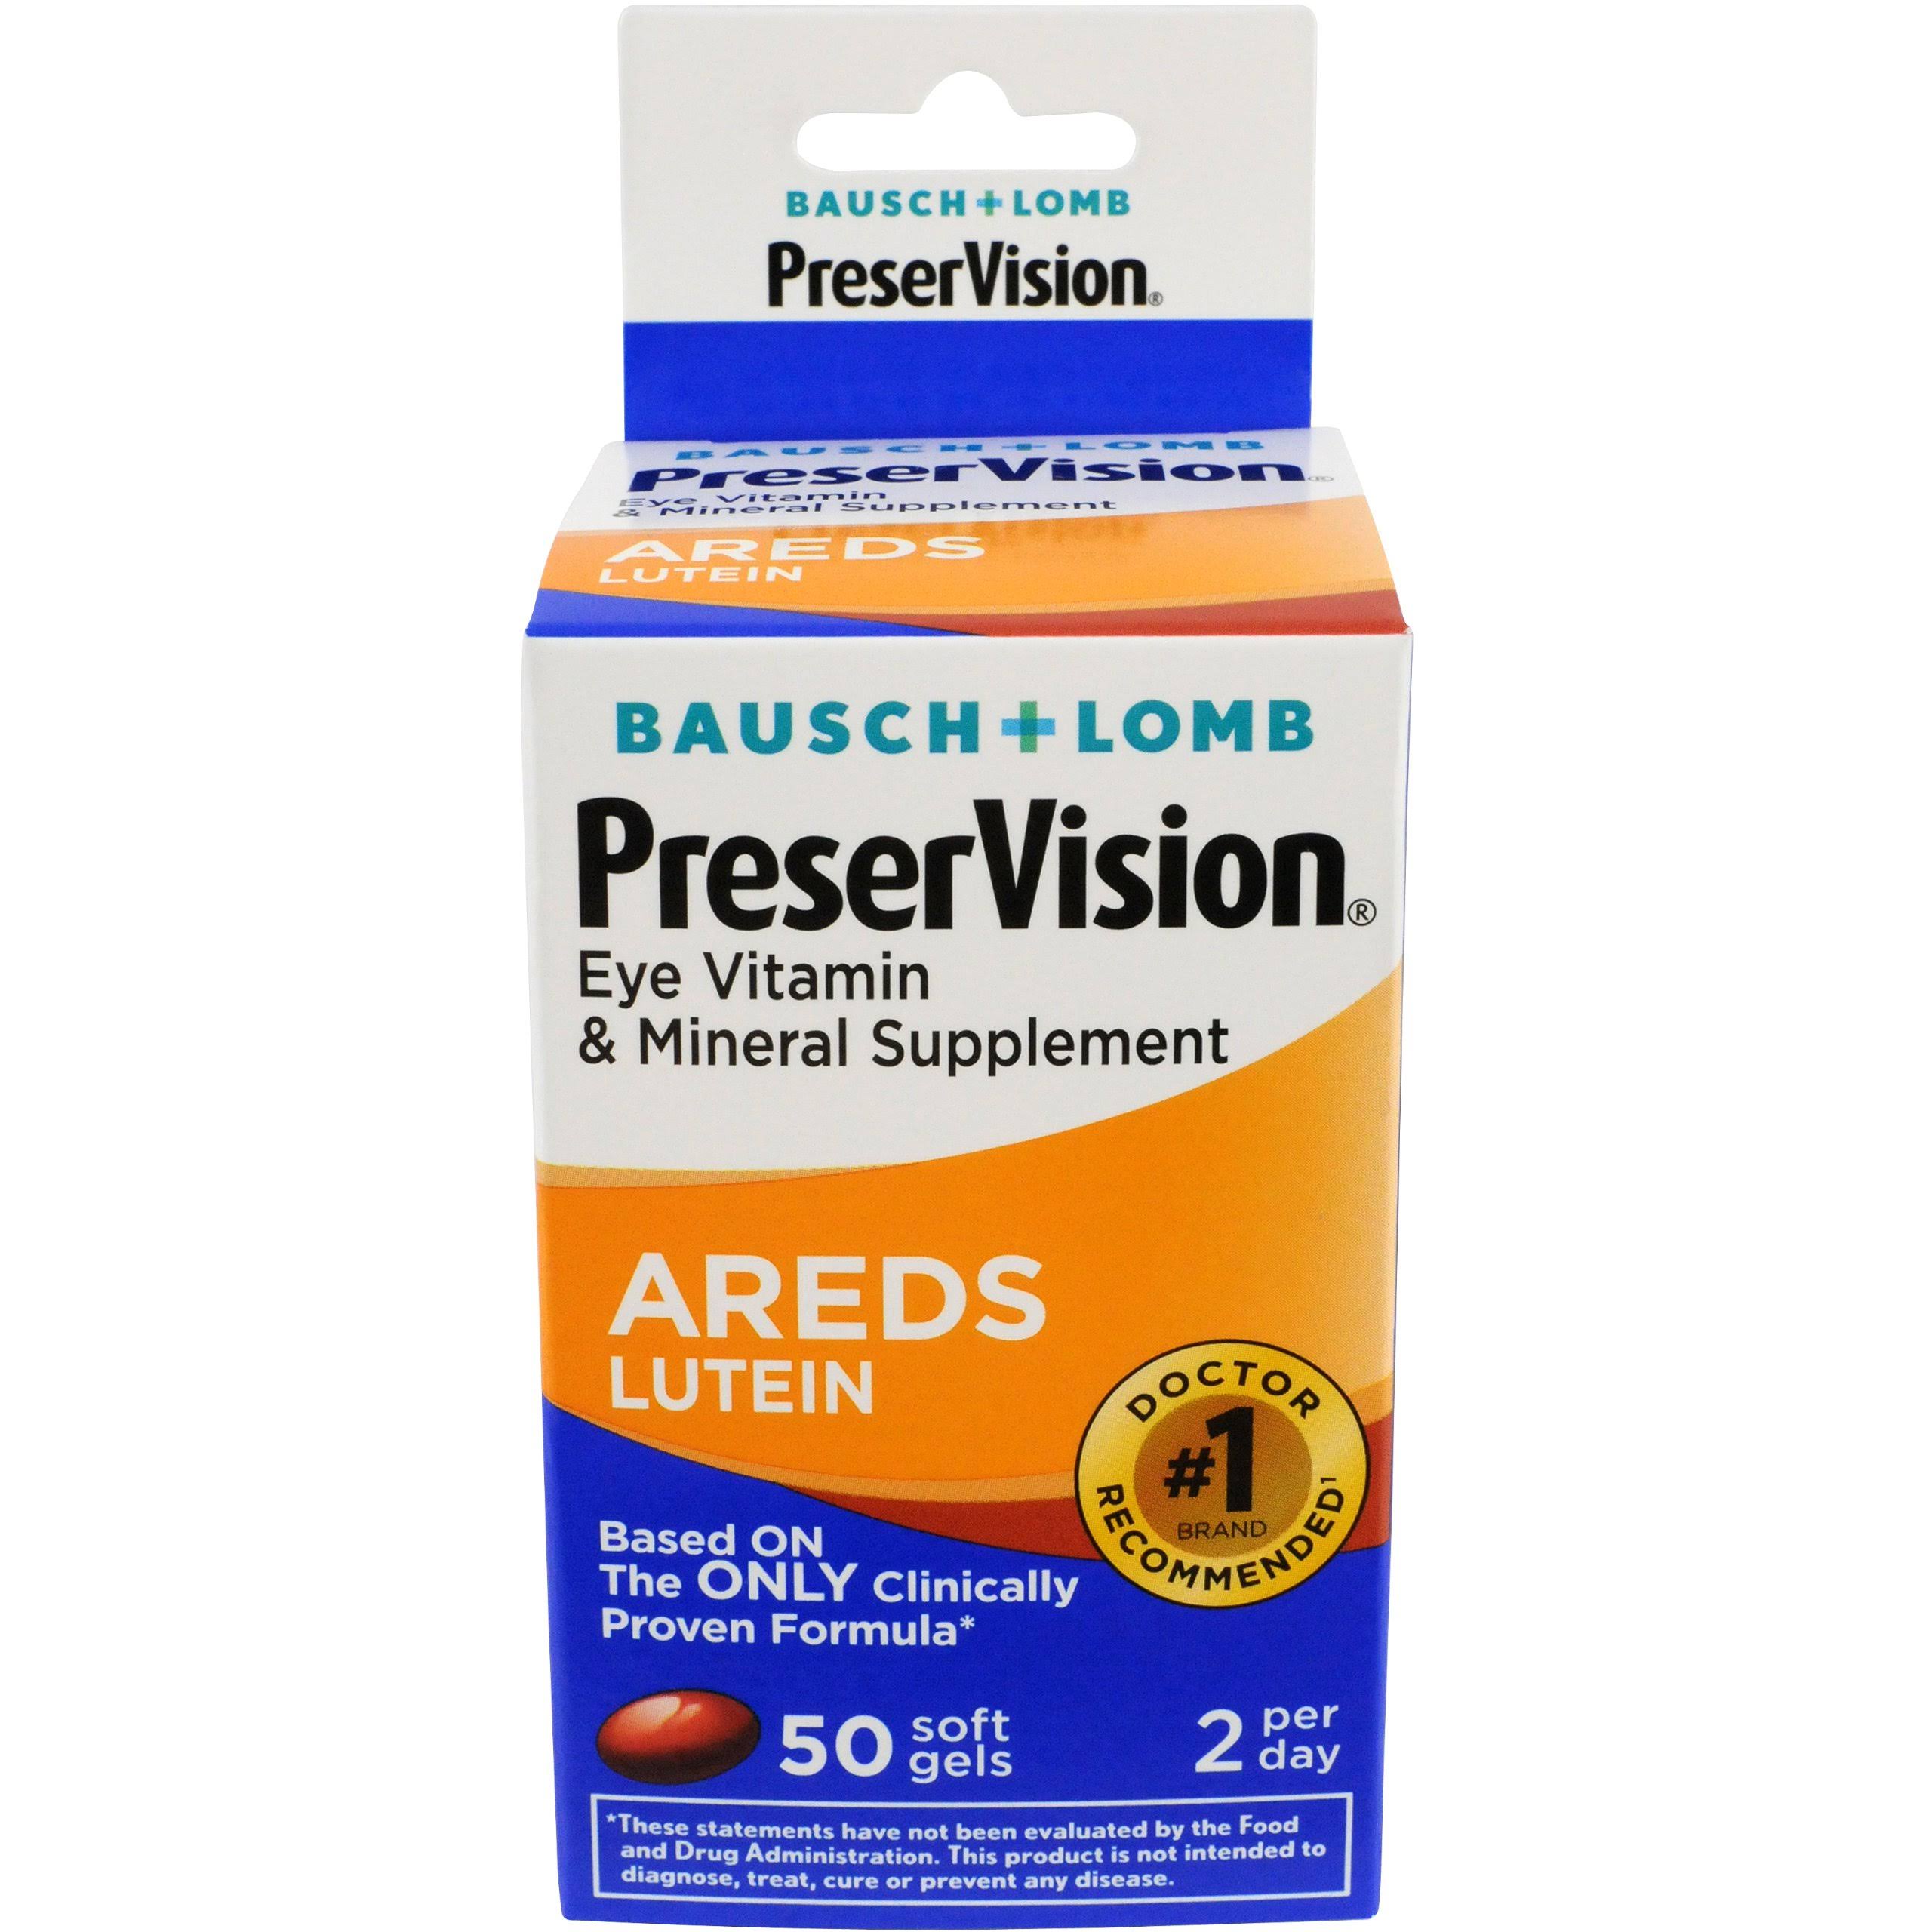 Bausch and Lomb Preservision with Lutein Eye Vitamin and Mineral Supplement - 50 Soft Gels